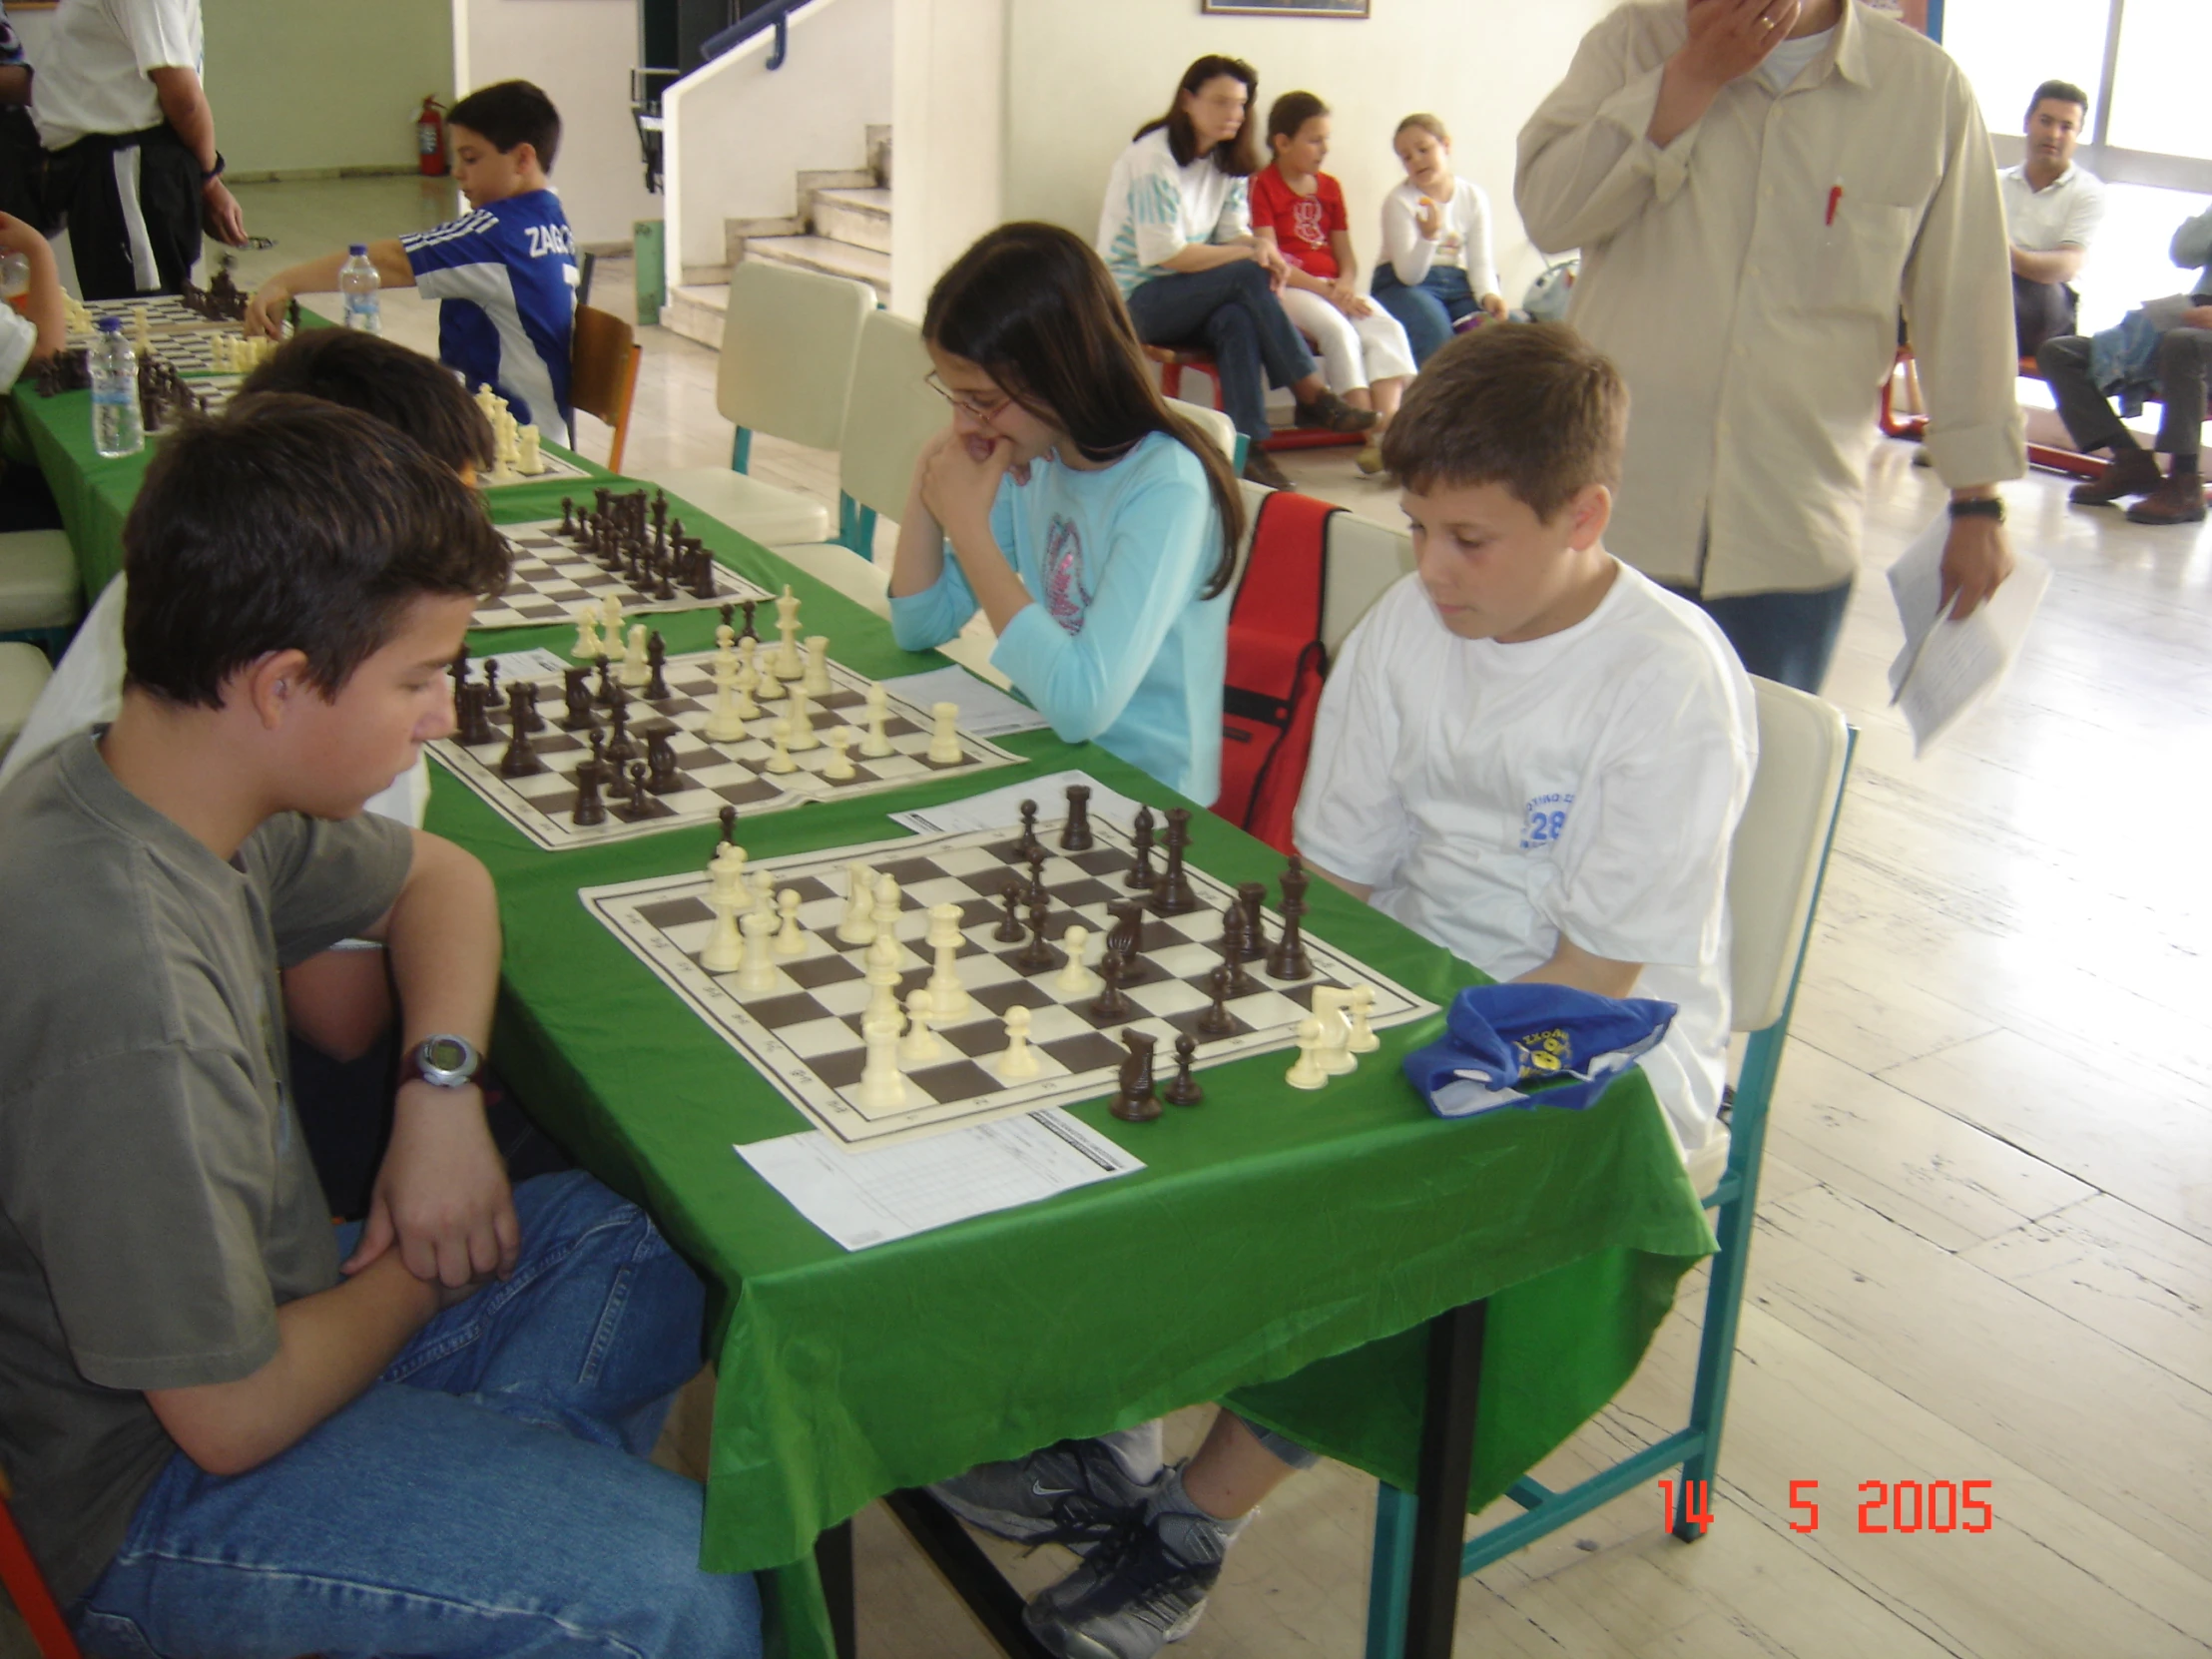 two boys sit at a table with chess pieces on it